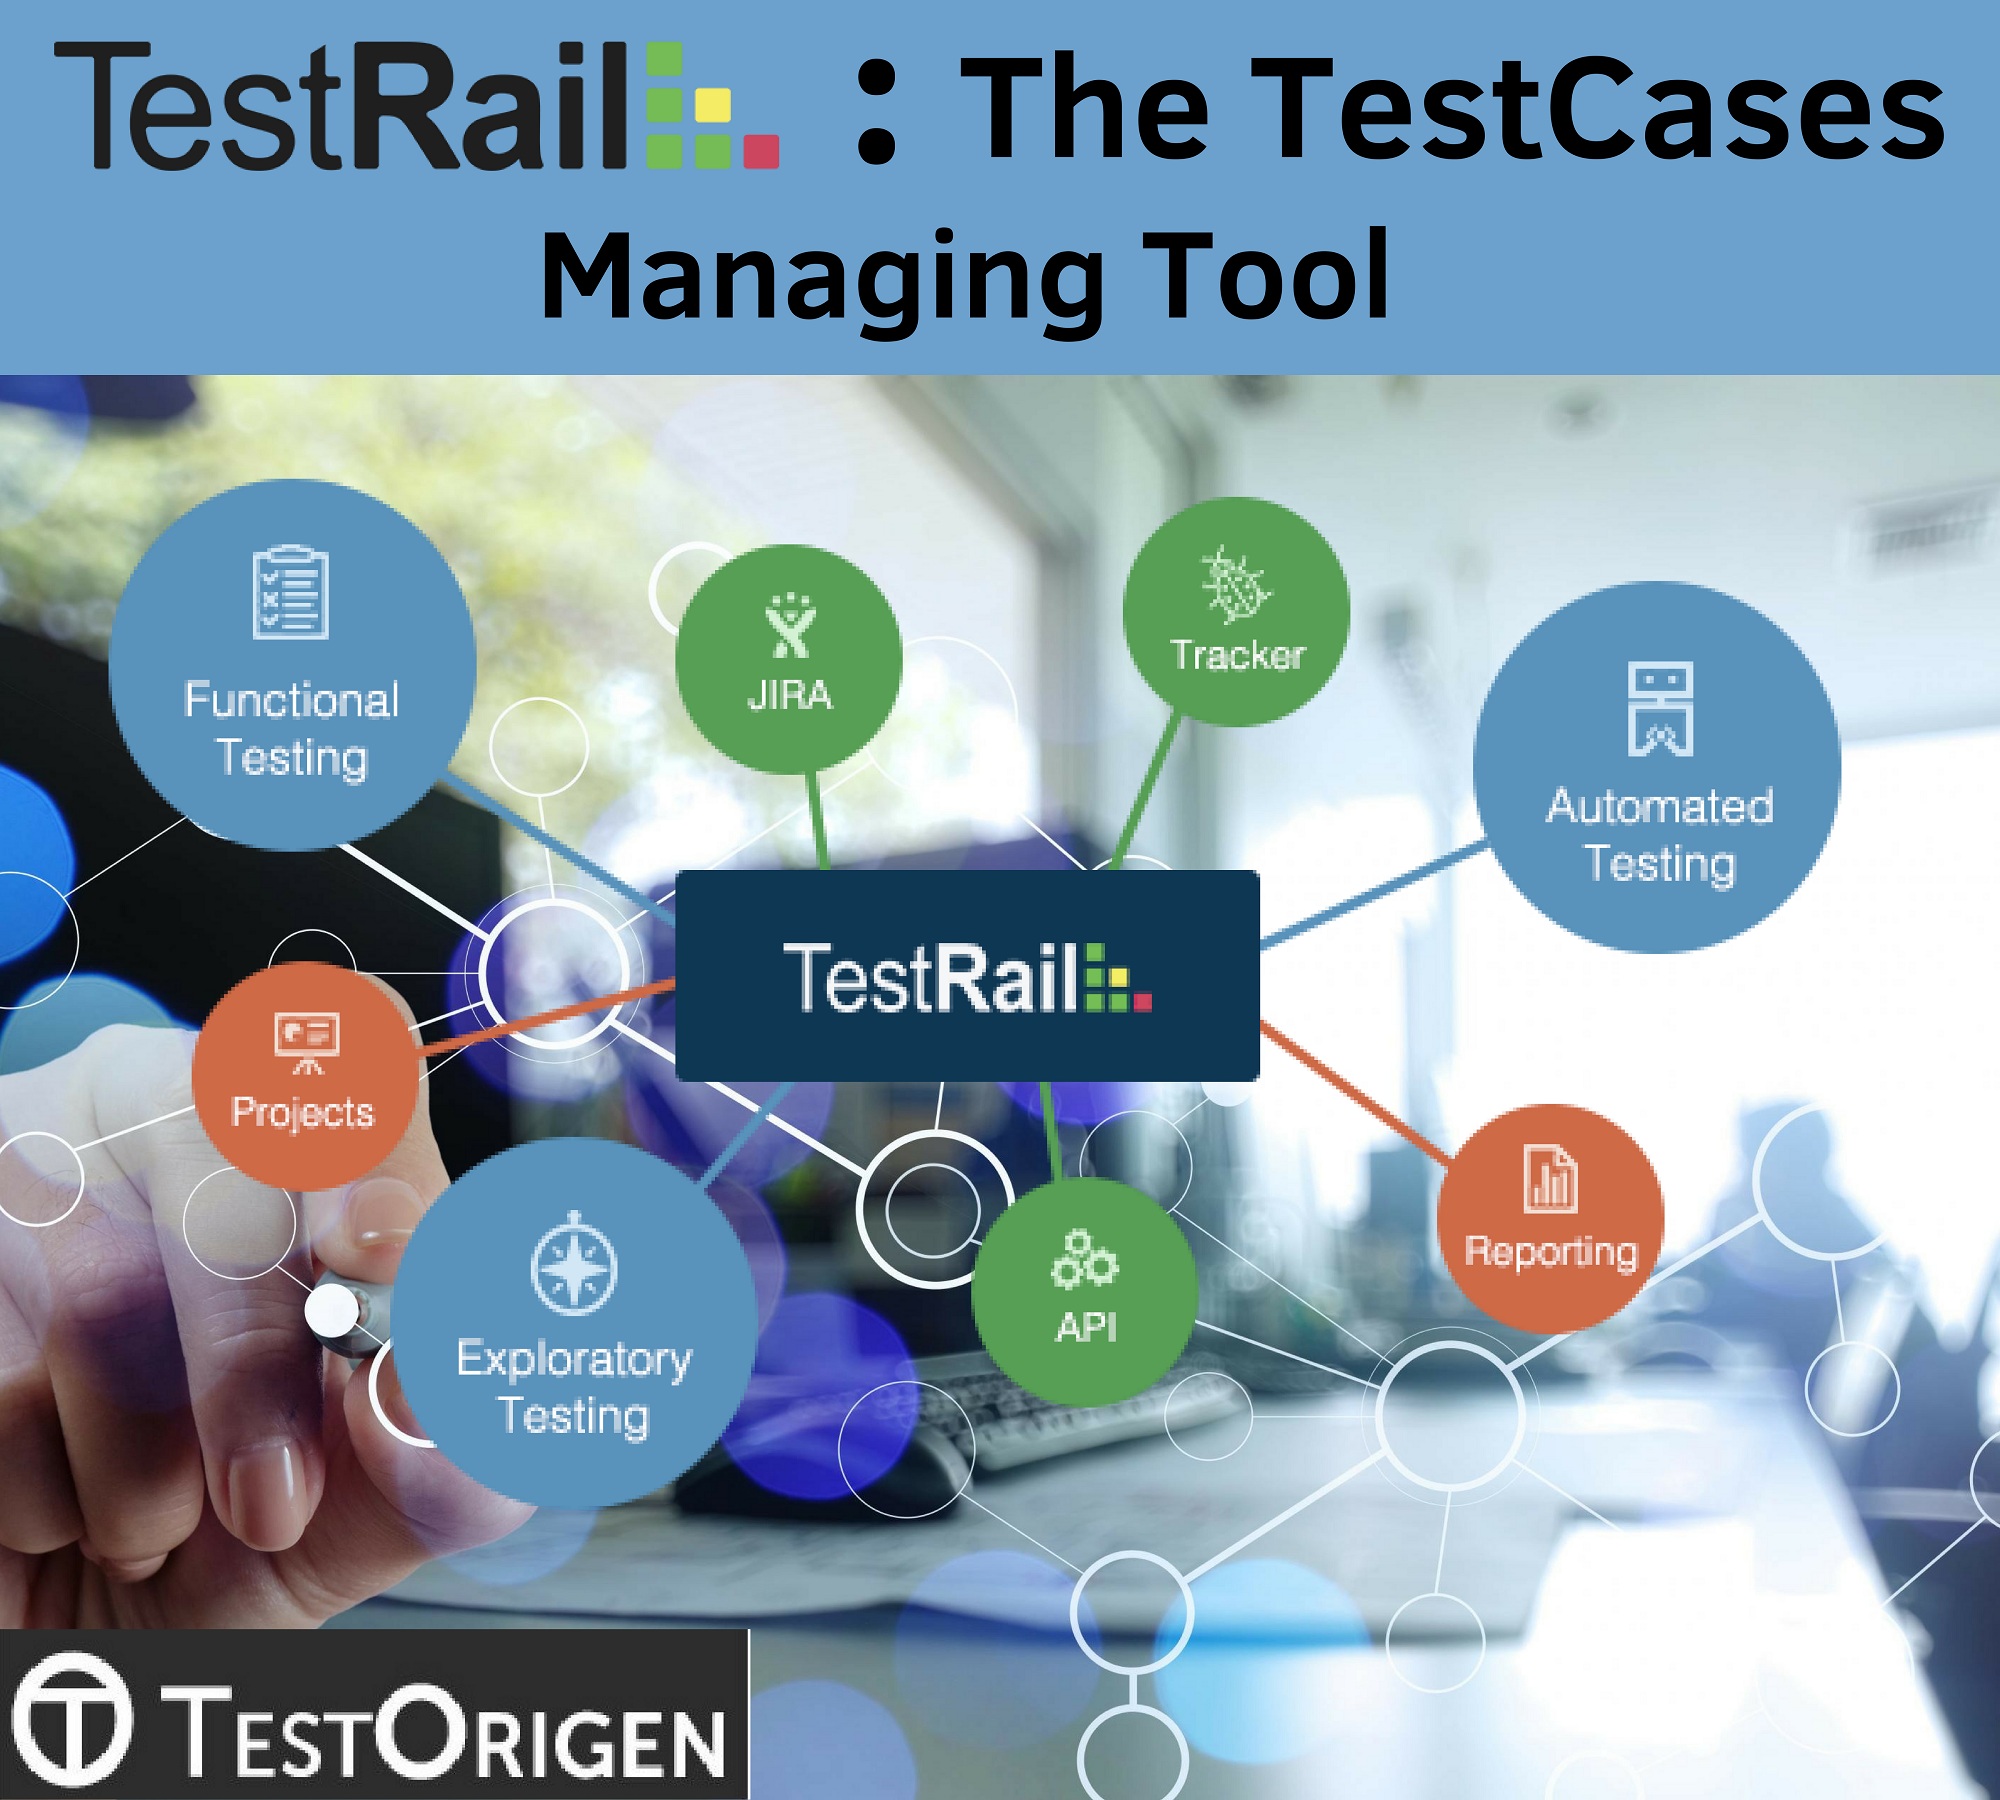 TestRail: The TestCases Managing Tool